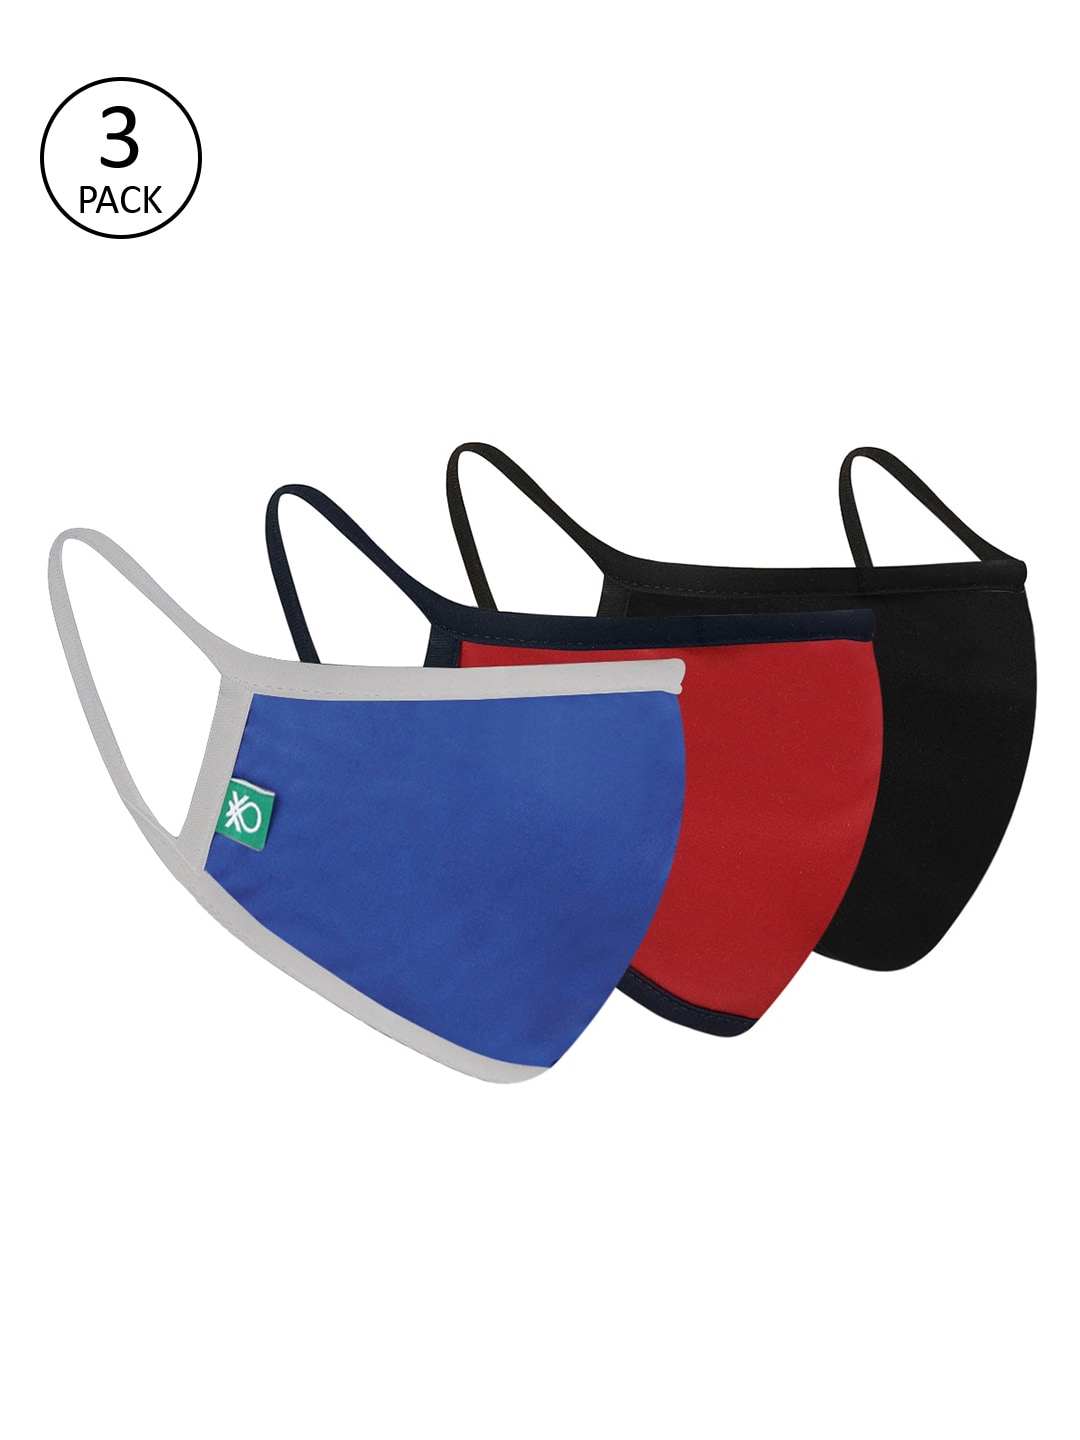 United Colors of Benetton Unisex 3 Pcs Assorted 3-Ply Reusable Anti-Microbial Cloth Masks Price in India